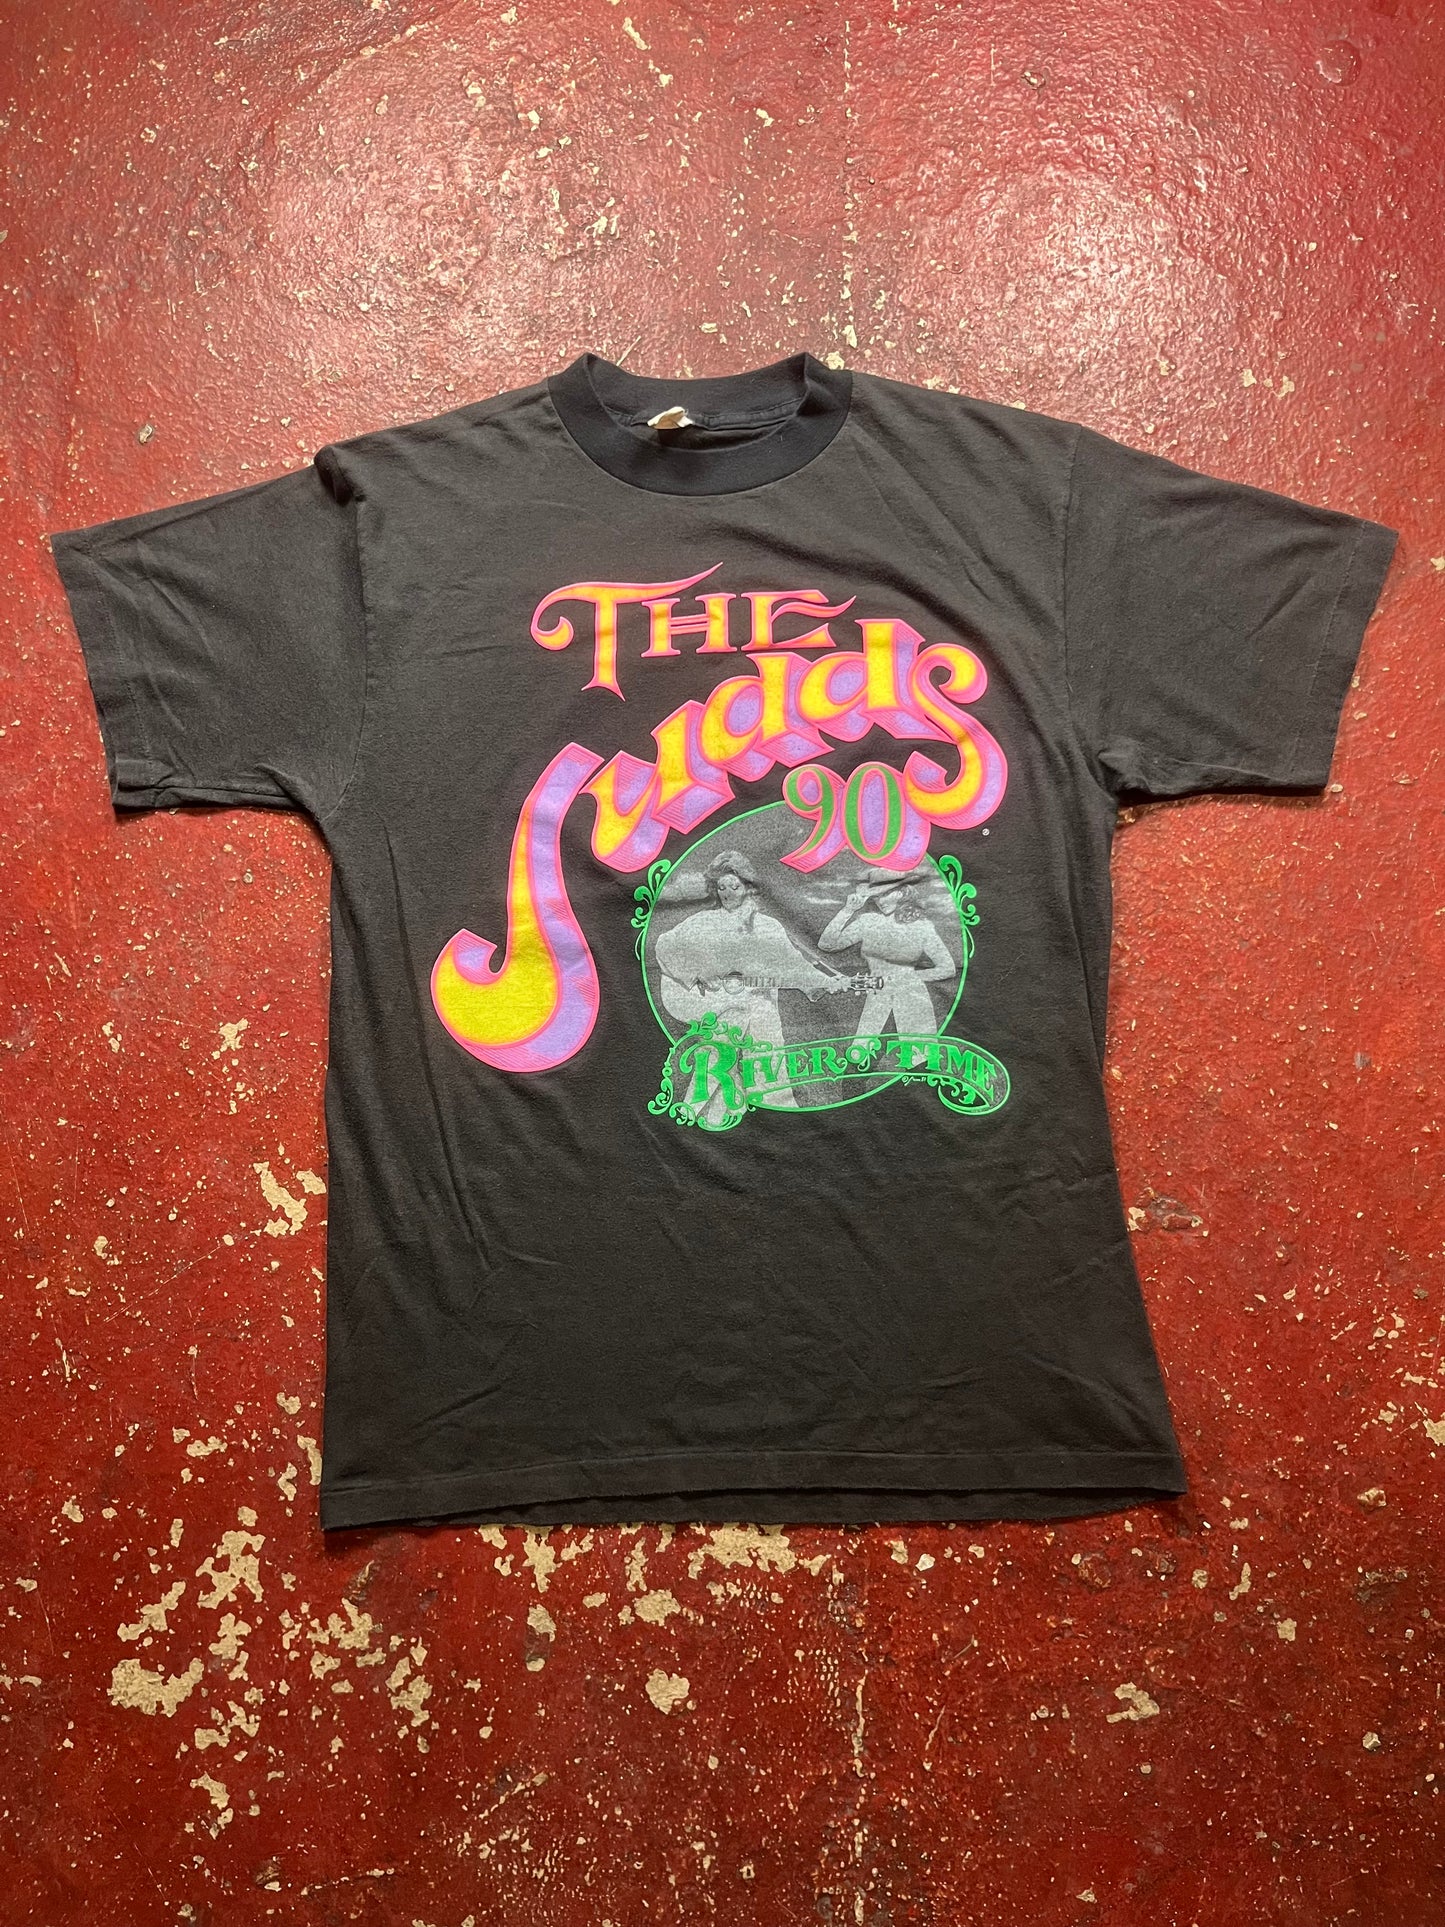 1990 Judds “River Of Time” Tee